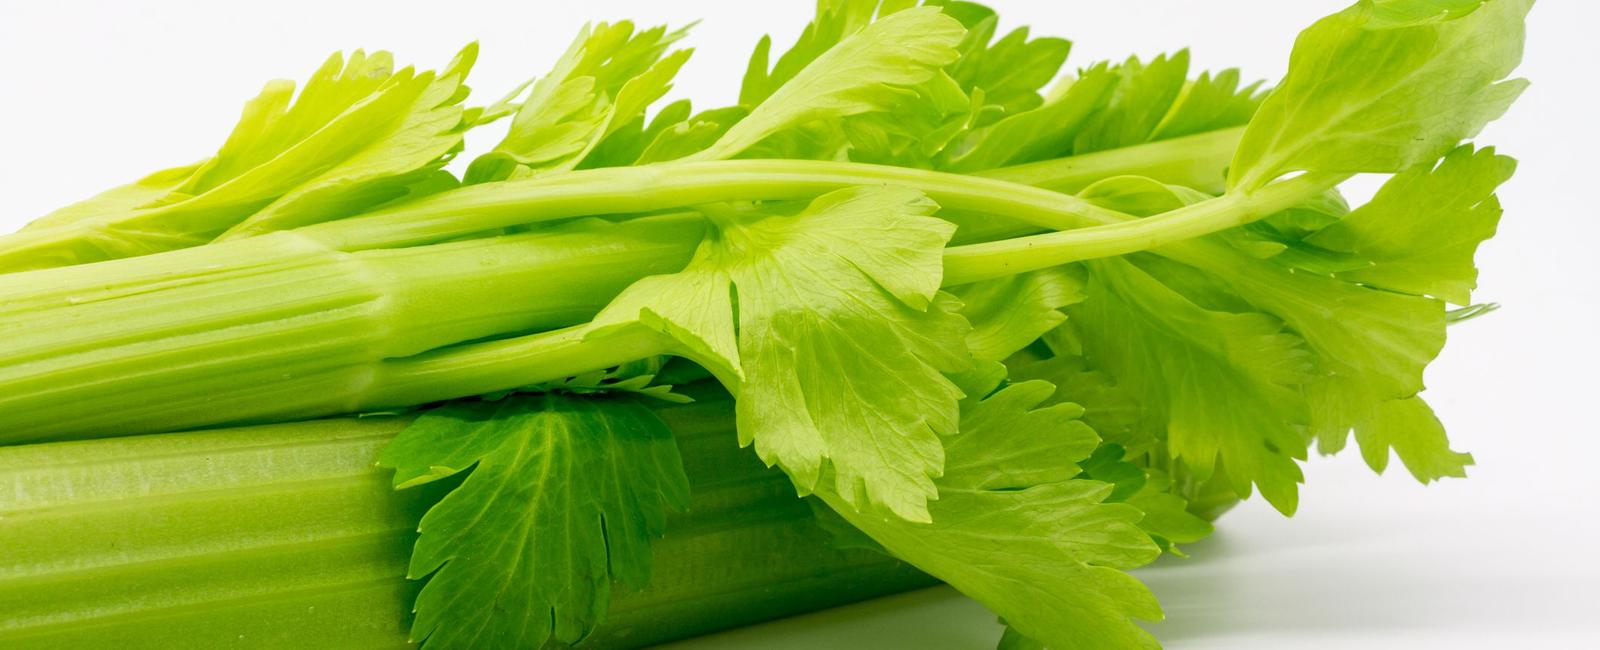 Chewing celery makes men more attractive to women it activates sex pheromones in men s sweat that send the correct scents and signals making them immediately irresistible